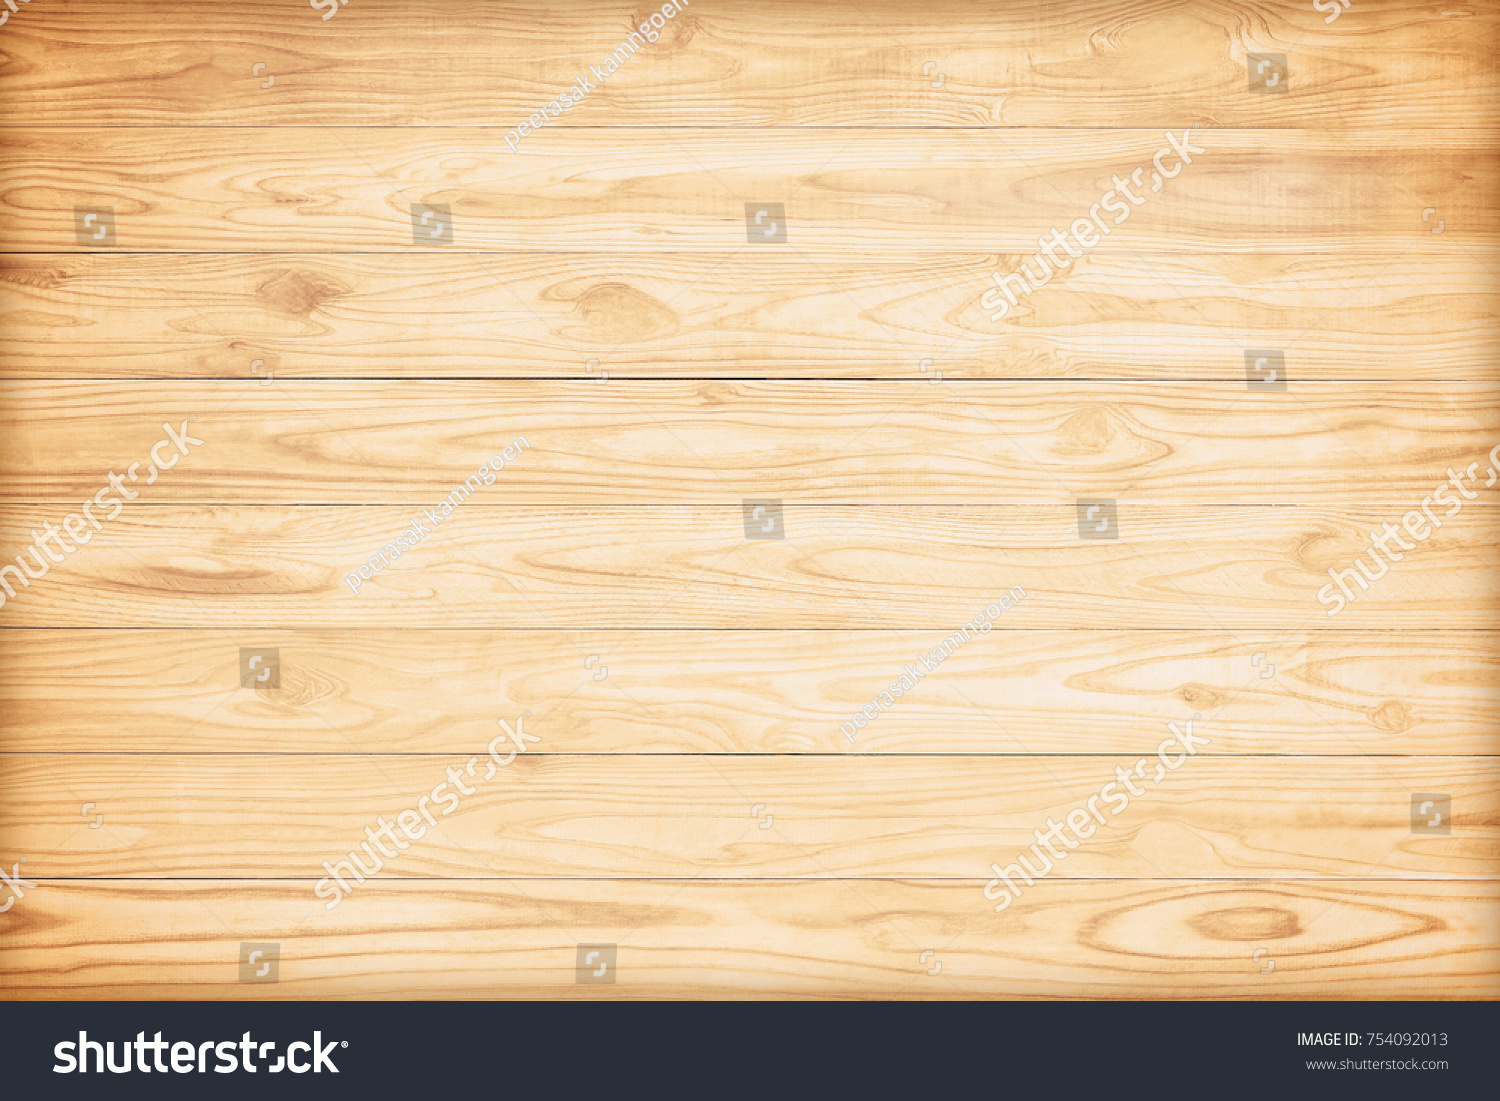 Wood wall background or texture. Natural pattern wood background #754092013